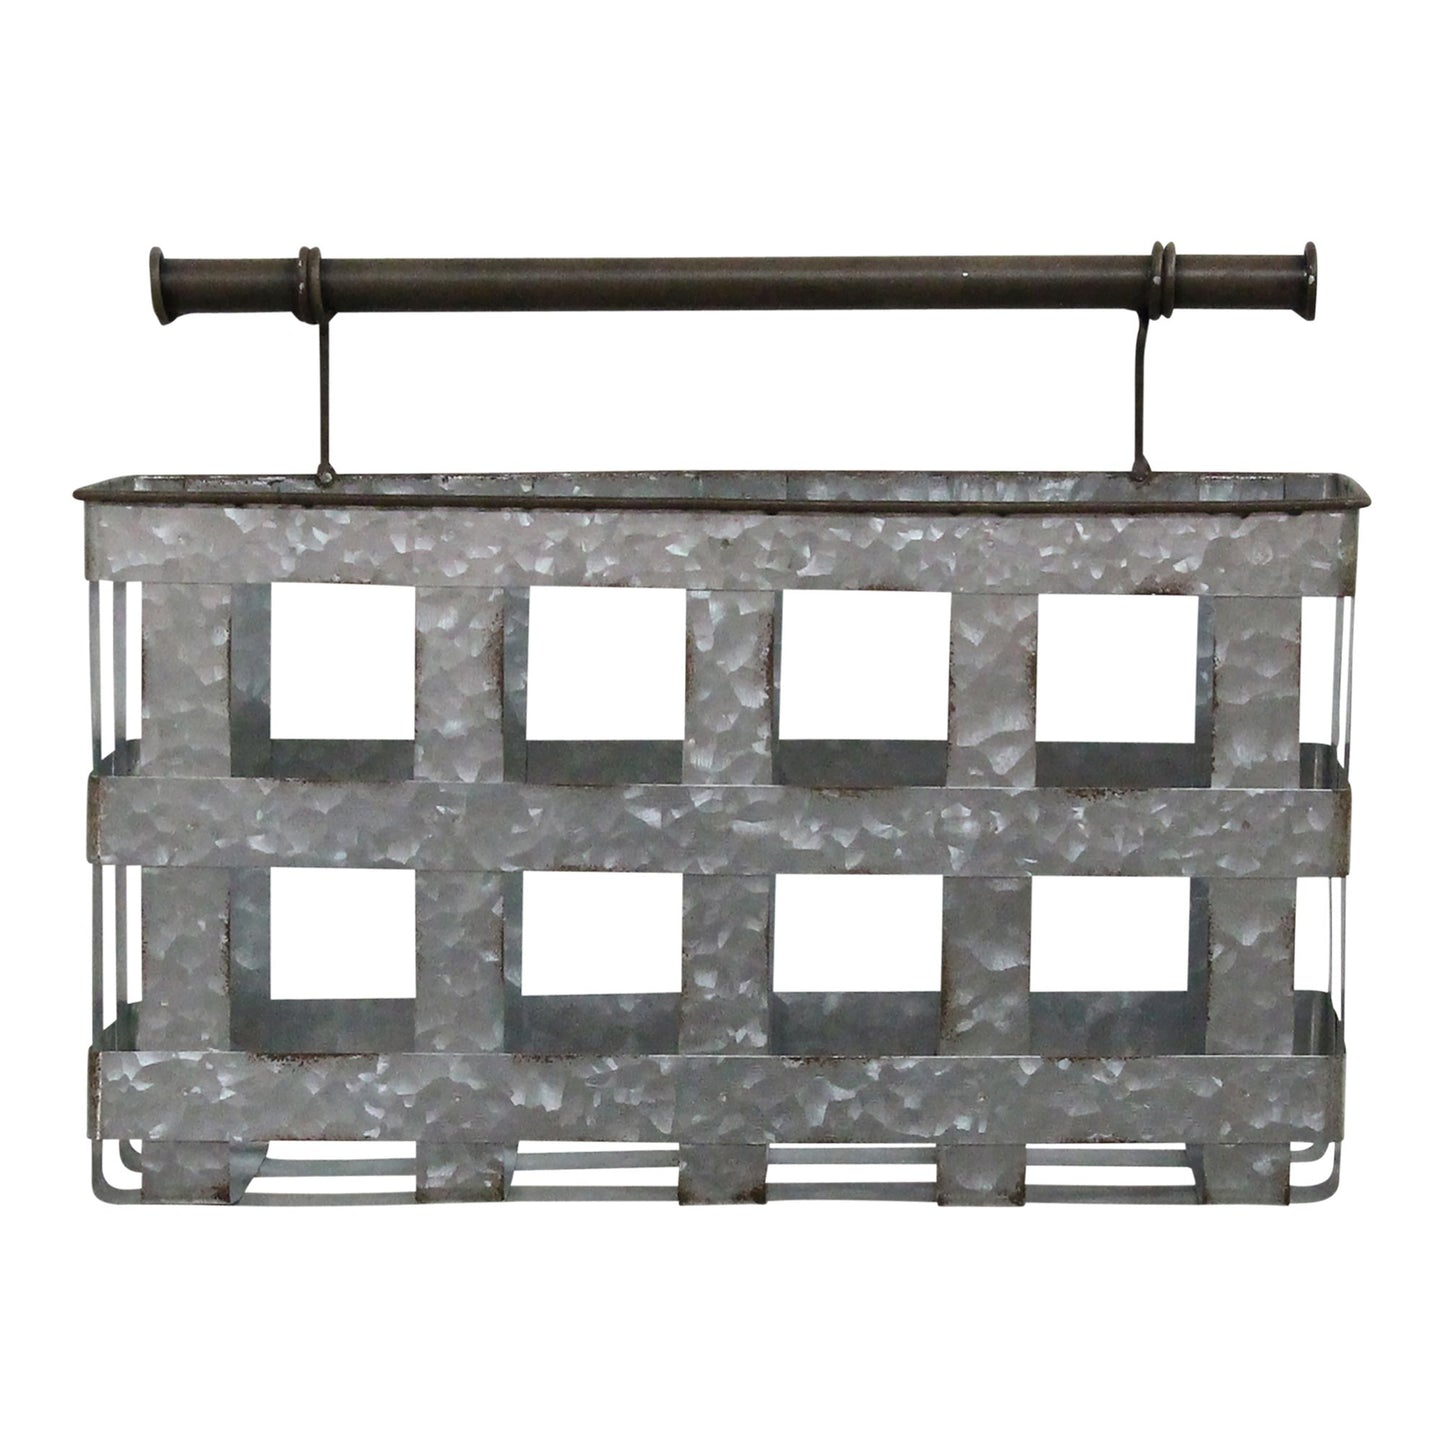 Galvanized Handcrafted Metal Wall Hanging Basket